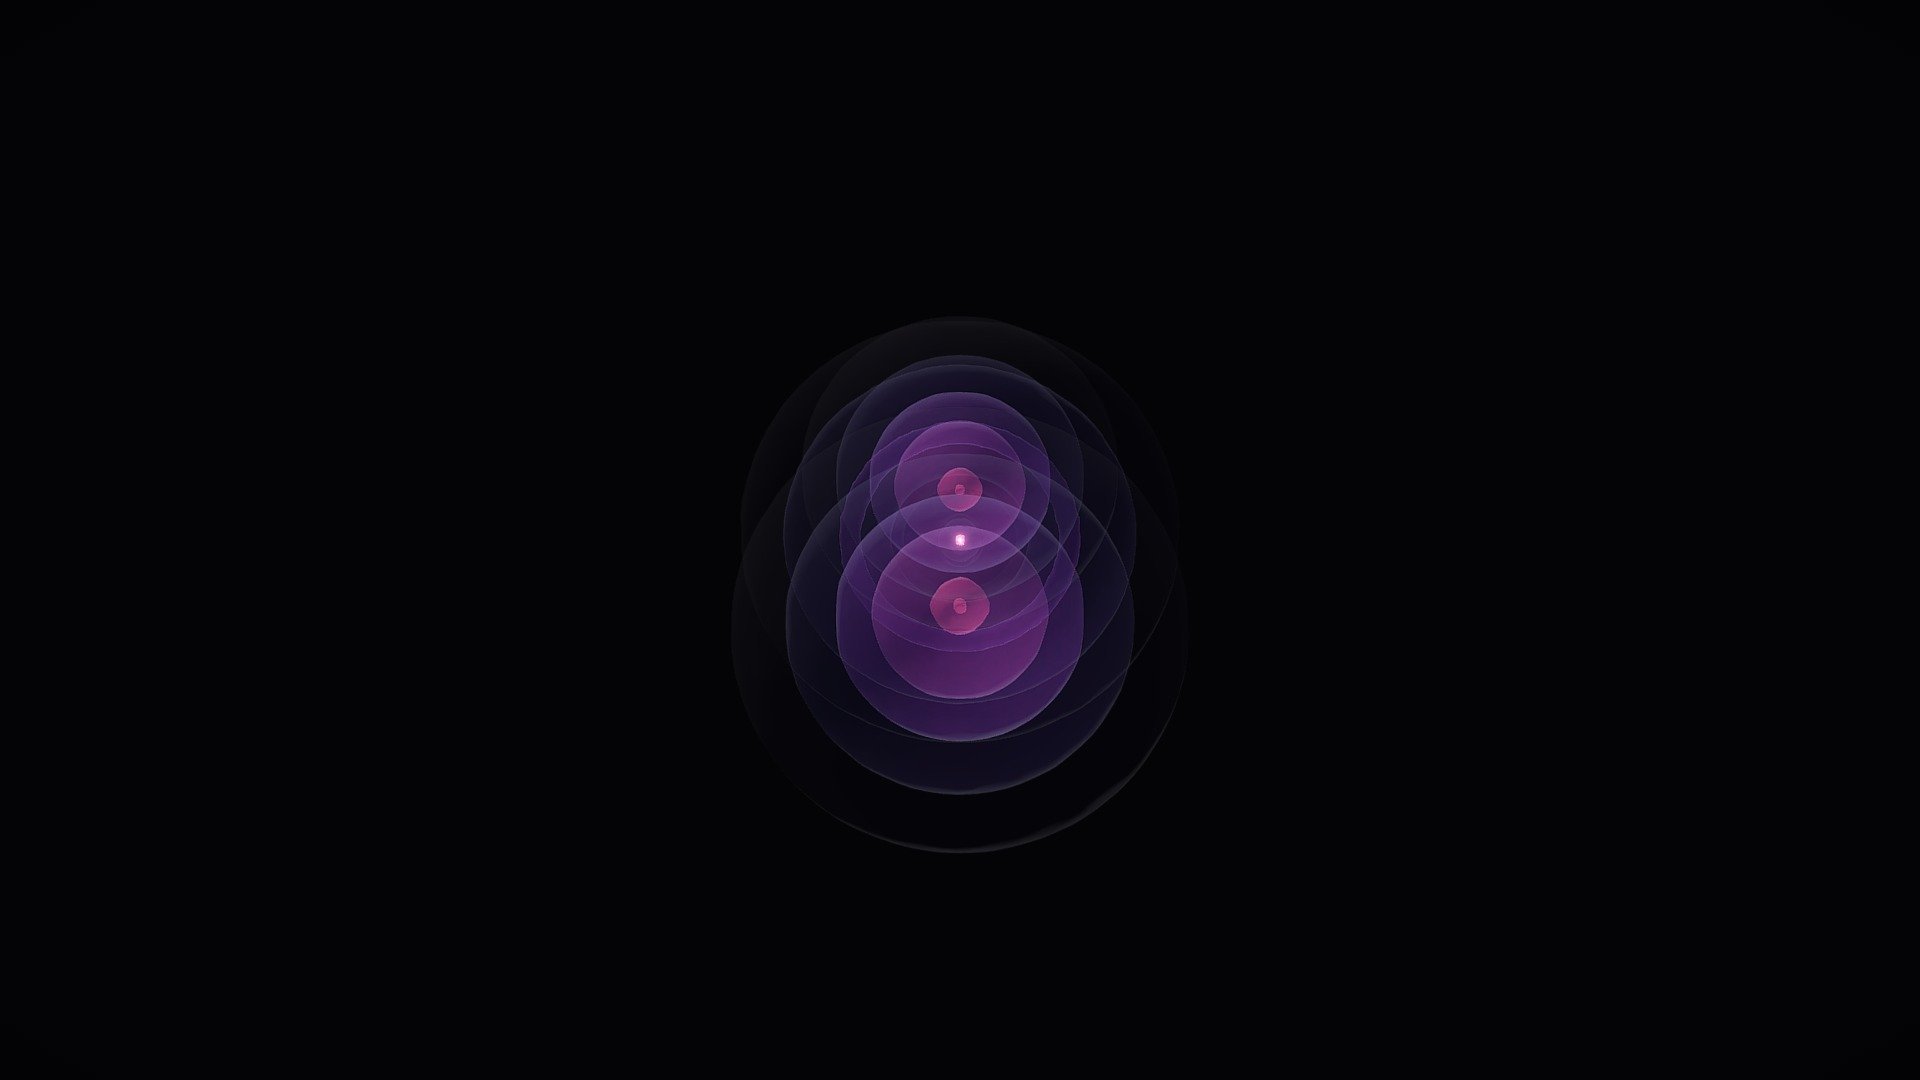 Simulation of the spatial probability distribution of the electron in an hydrogen atom, residing in a strong magnetic field.



Data: https://klacansky.com/open-scivis-datasets/

Acknowledgement: volvis.org and SFB 382 of the German Research Council (DFG) - Hydrogen Atom - 3D model by Tomer Nussbaum (@tomer.nussbaum) 3d model